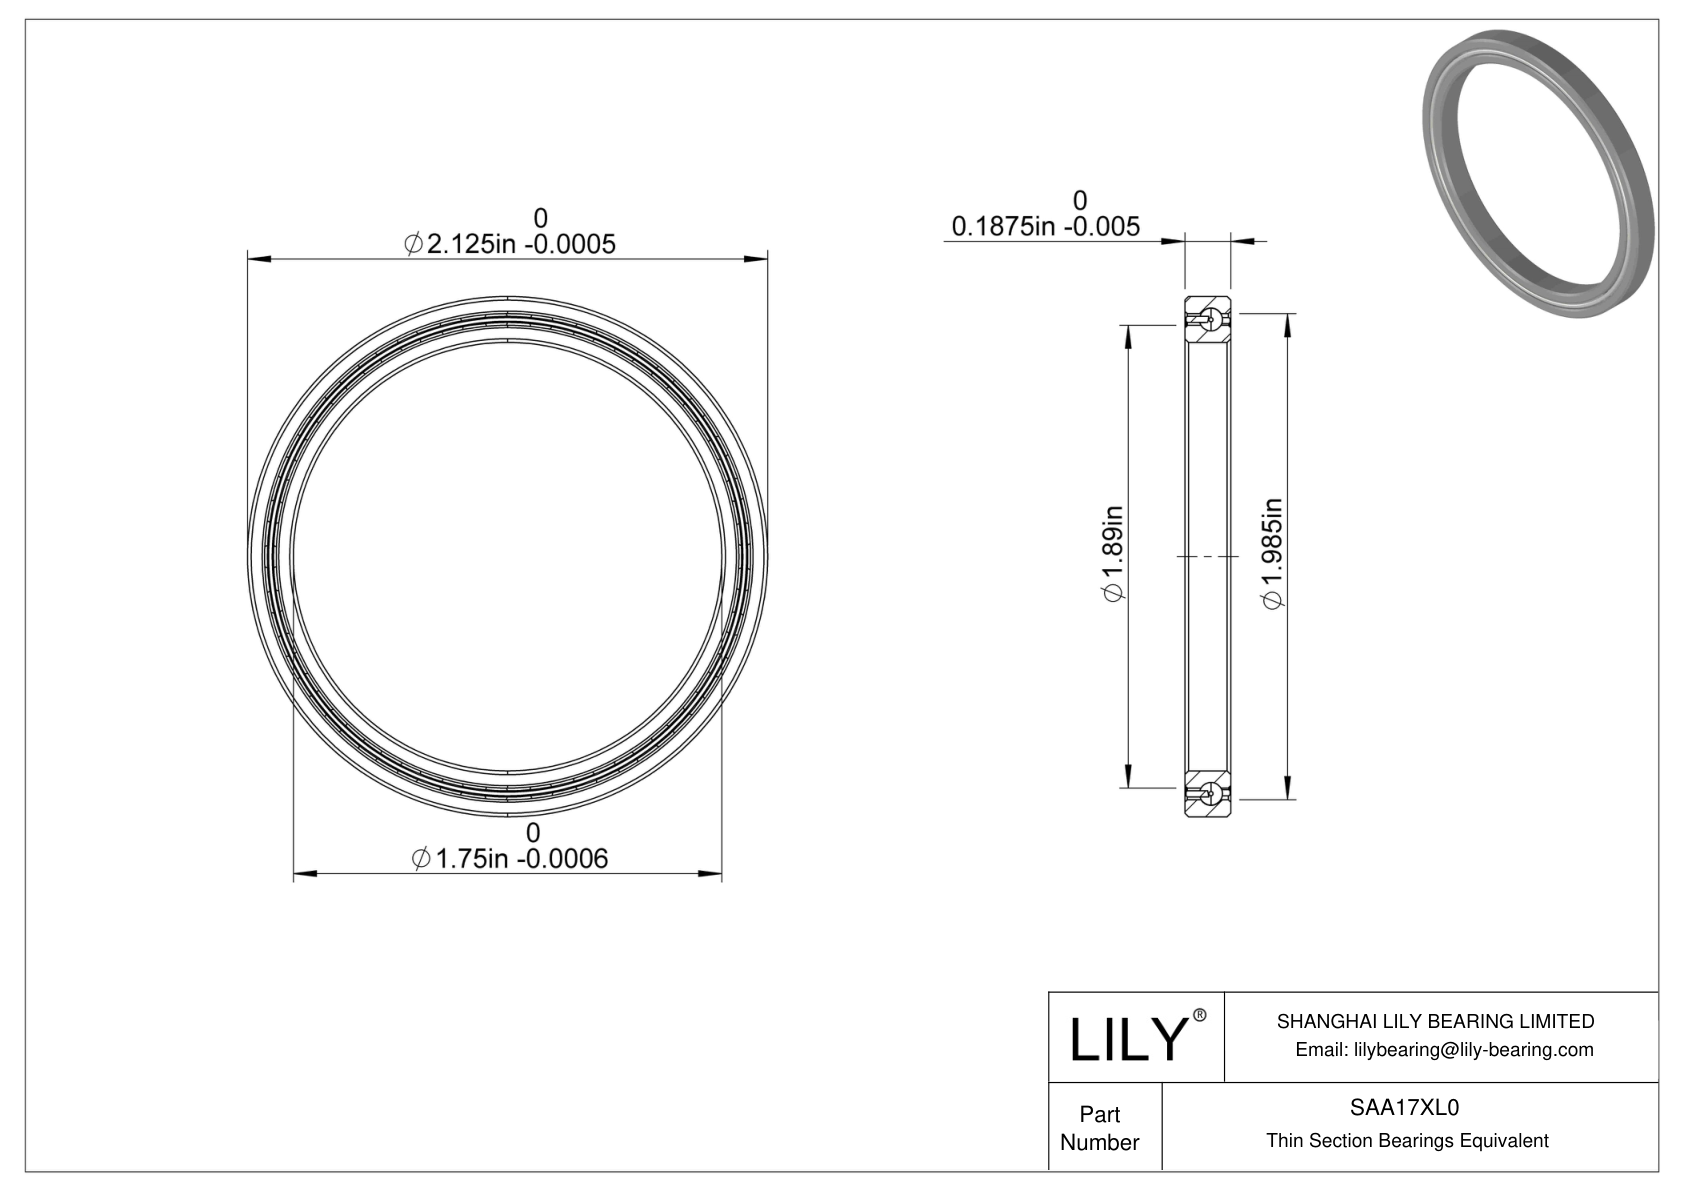 SAA17XL0 Constant Section (CS) Bearings cad drawing